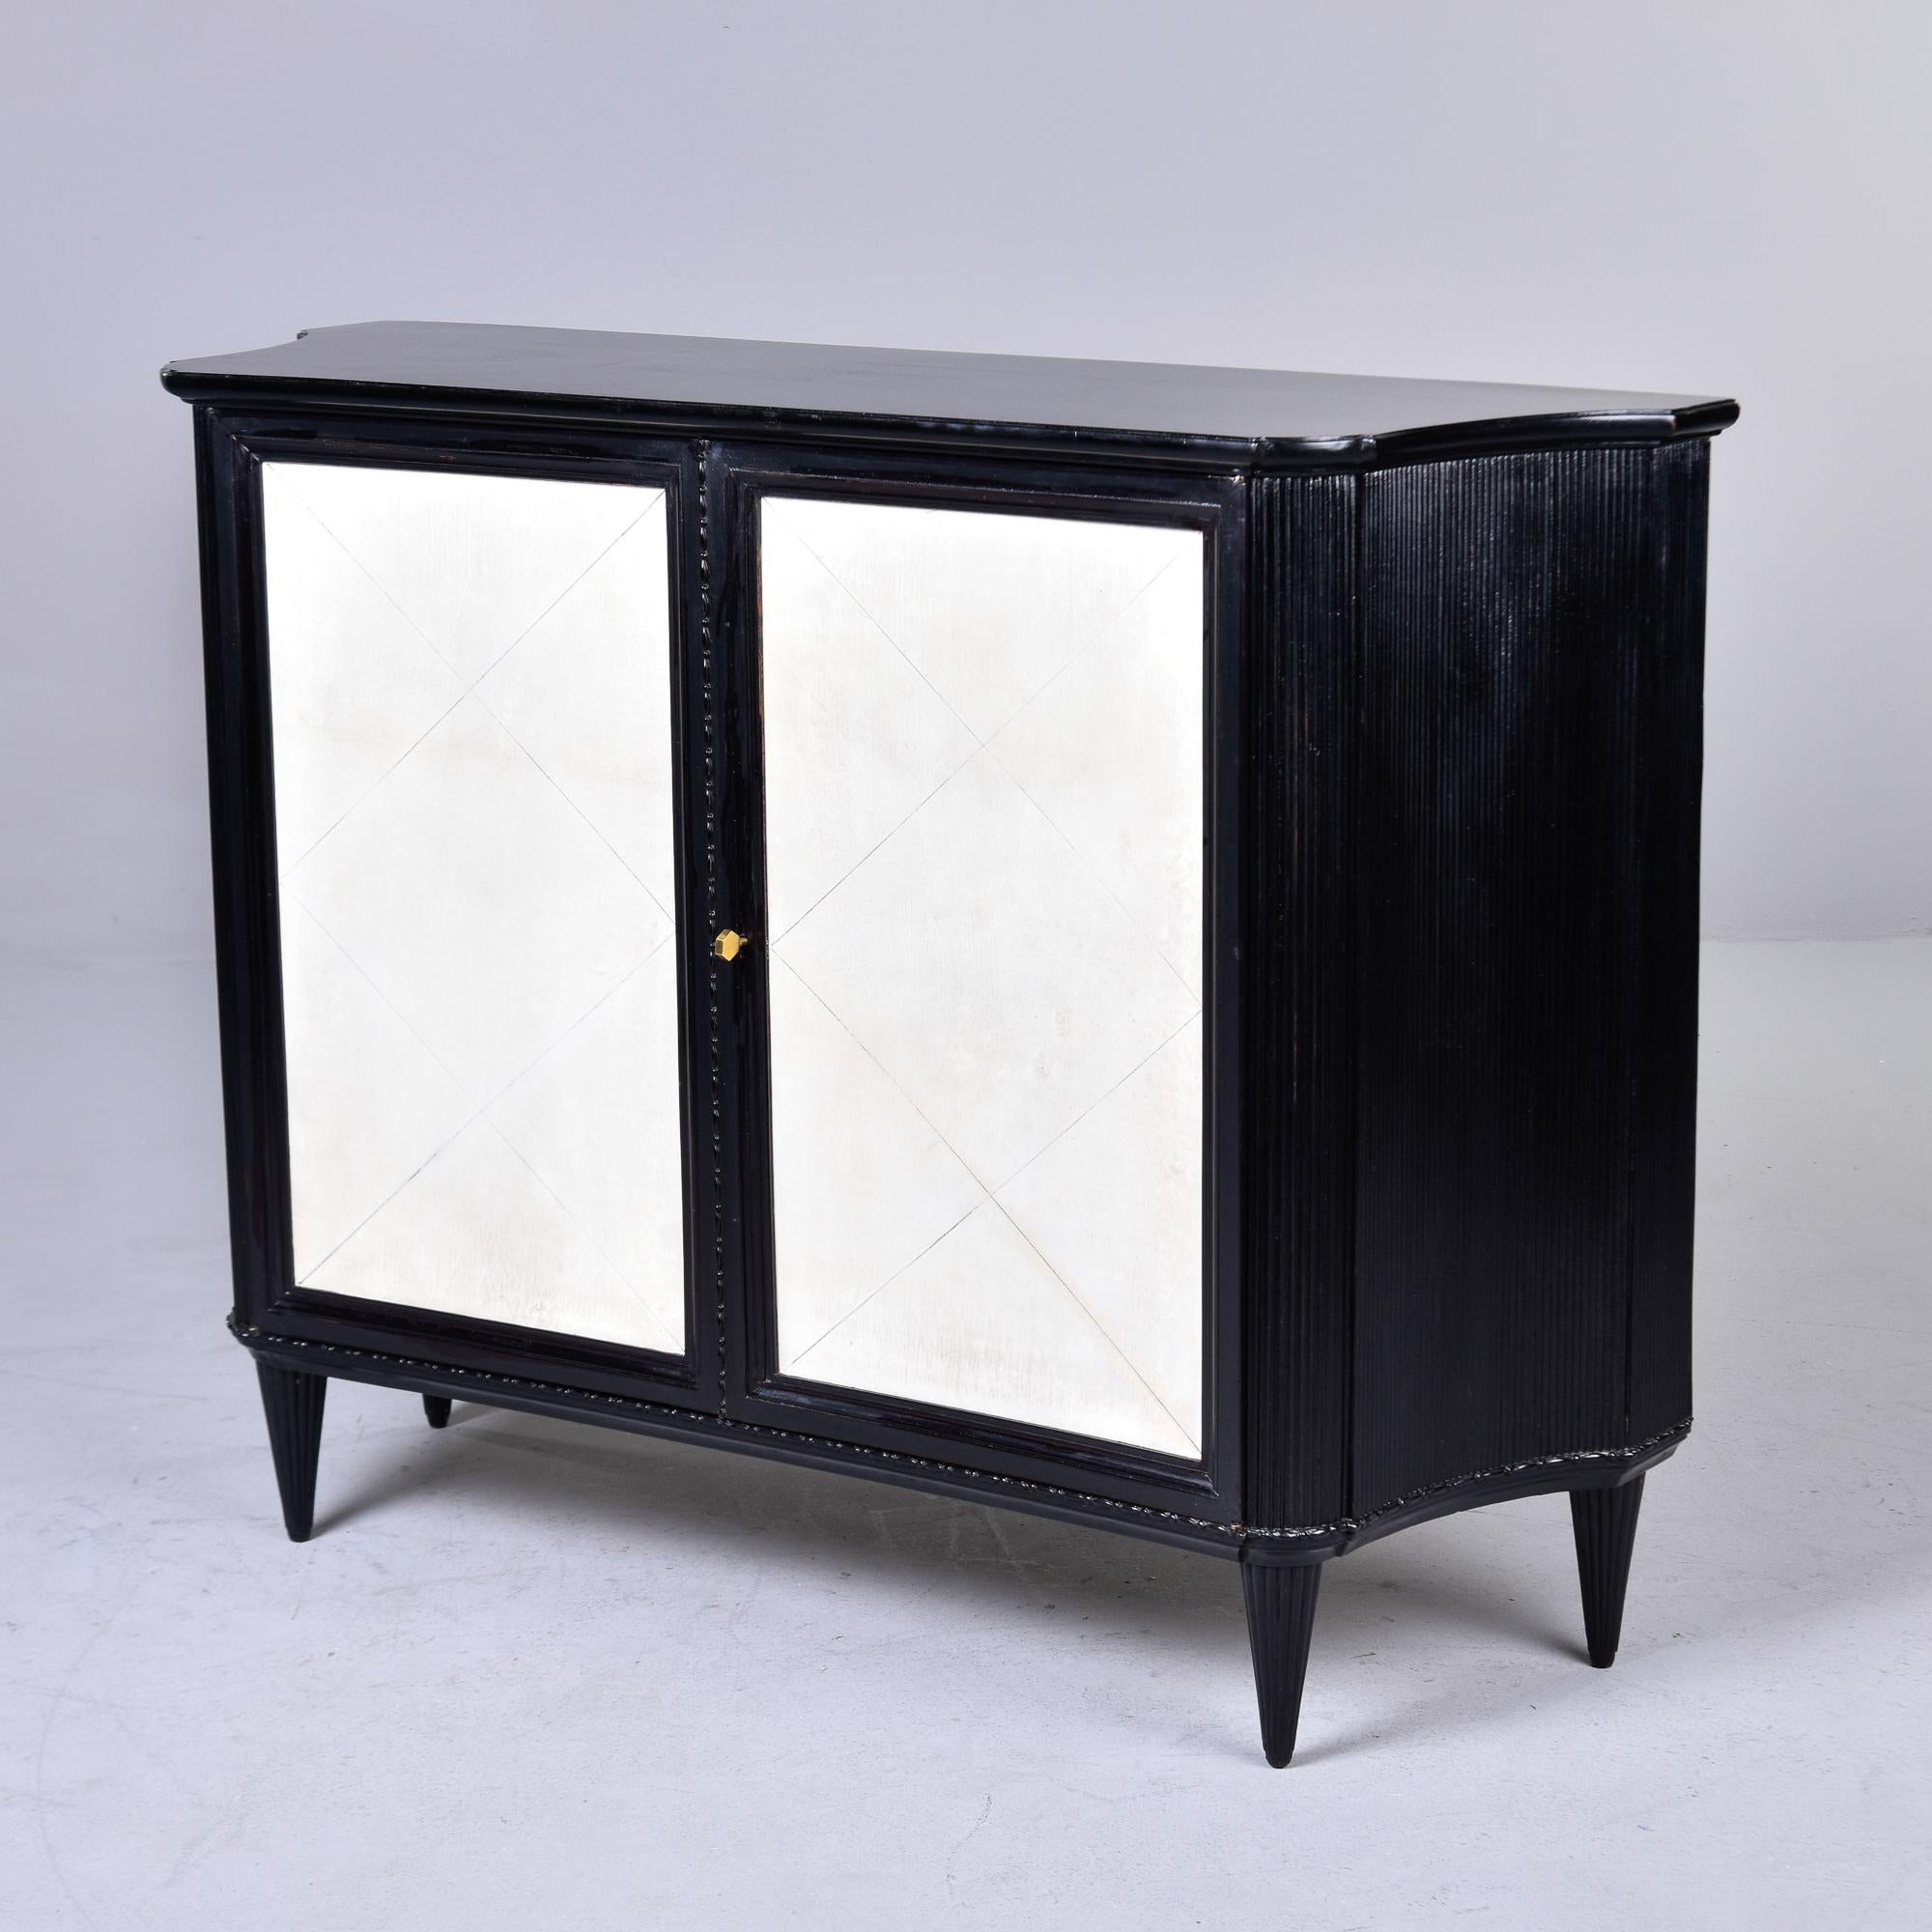 Found in Italy, this two door chest with ebonised frame and parchment doors dates from the 1960s. Outside of cabinet base has an ebonised finish. Two hinged, locking front doors have parchment fronts with diamond pattern. Doors open to wood stained